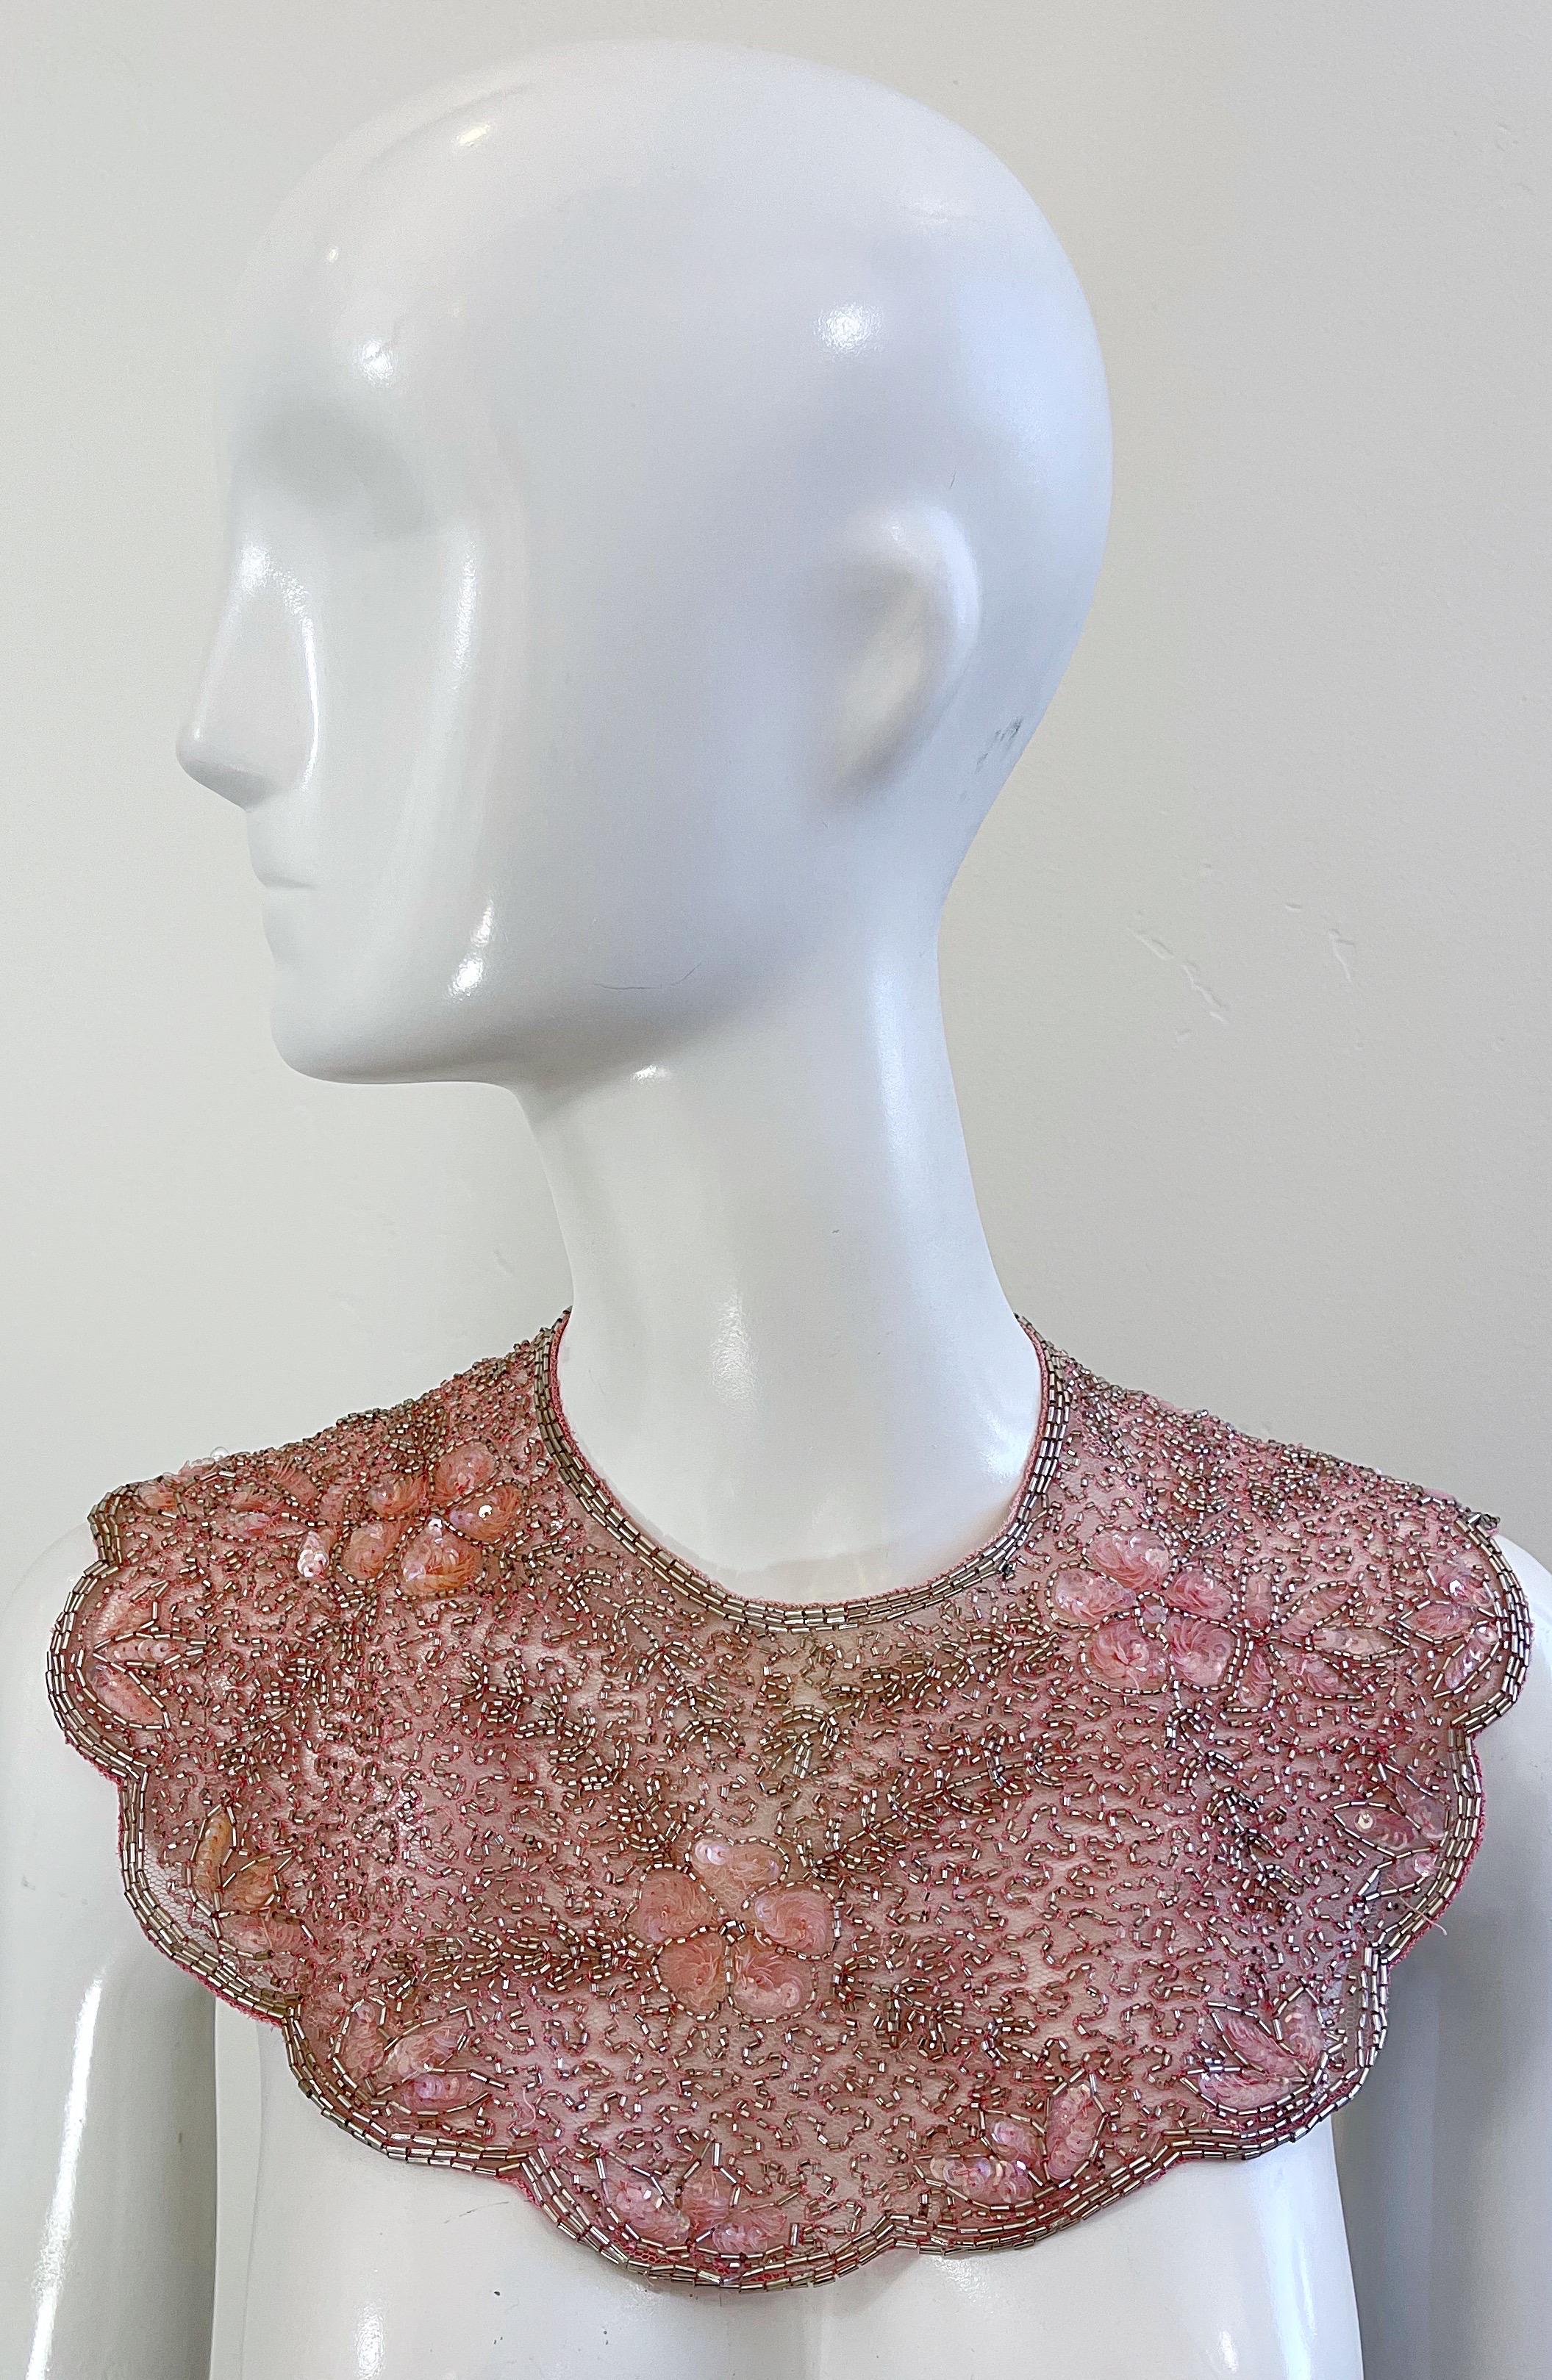 Beautiful vintage MARY MCFADDEN pink beaded and sequined collar ! Features thousands of hand-sewn sequins and beads throughout the entire piece. Hook-and-eye closures at the back neck. Can be flipped around and worn backwards as well.
In great